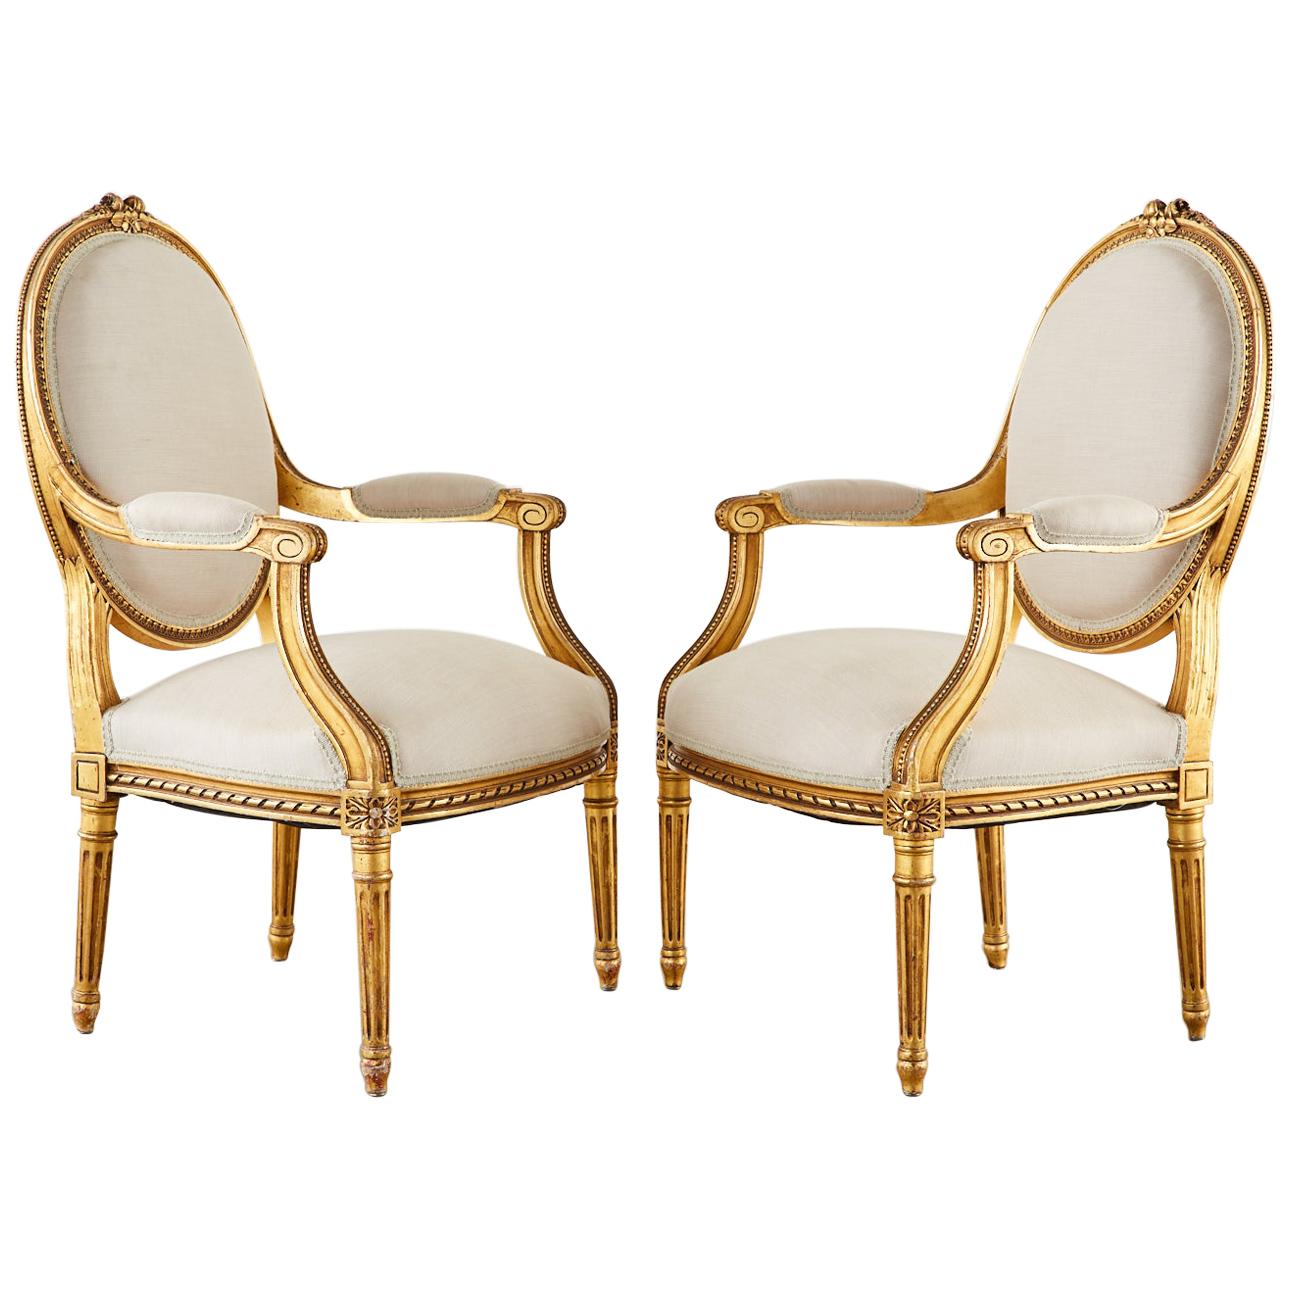 Pair of Louis XVI Style Giltwood Linen Fauteuil Armchairs